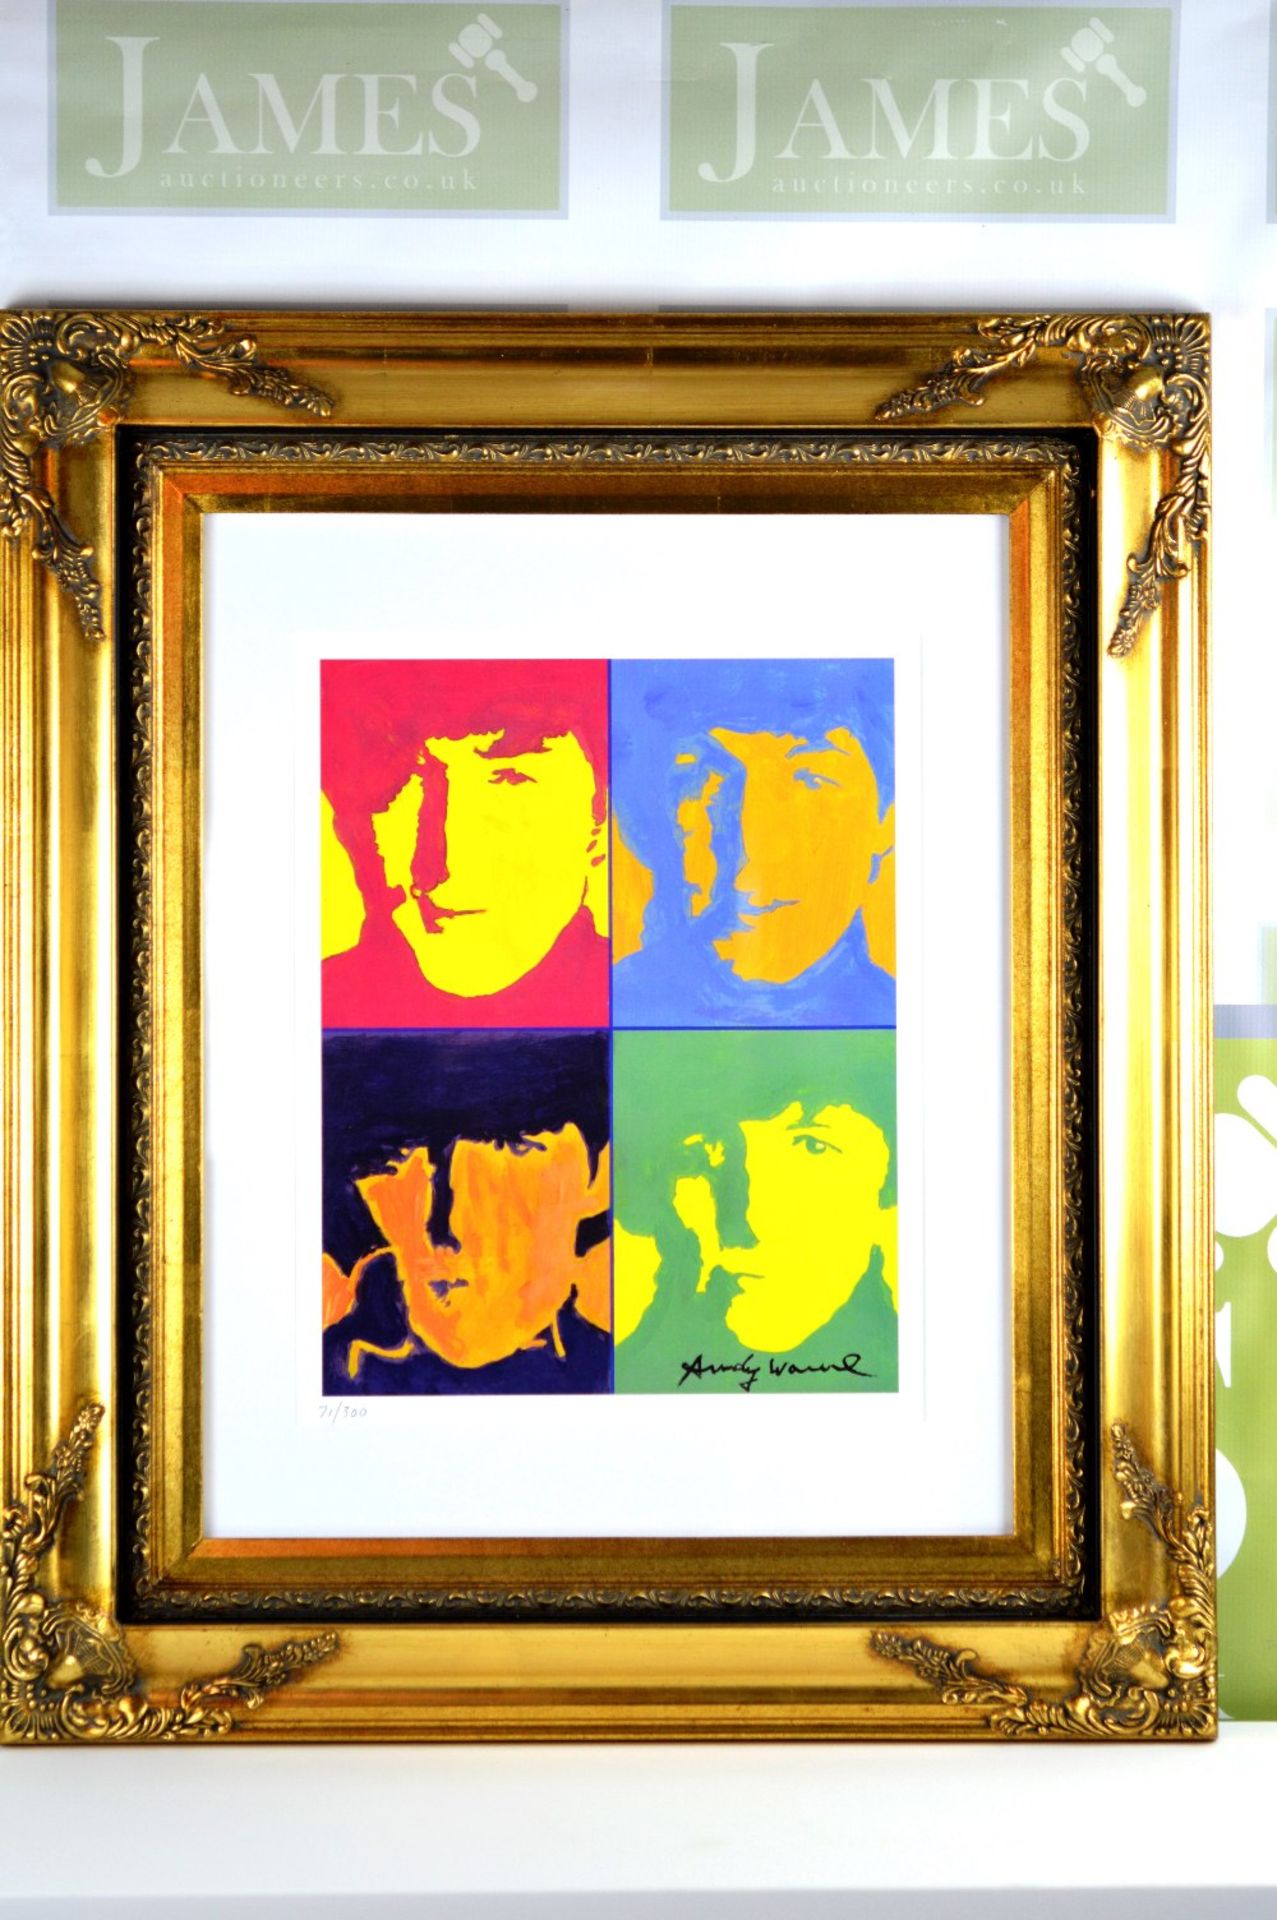 Andy Warhol Signed & Hand-Numberd Limited Edition "The Beatles" Lithograph Print 173/300